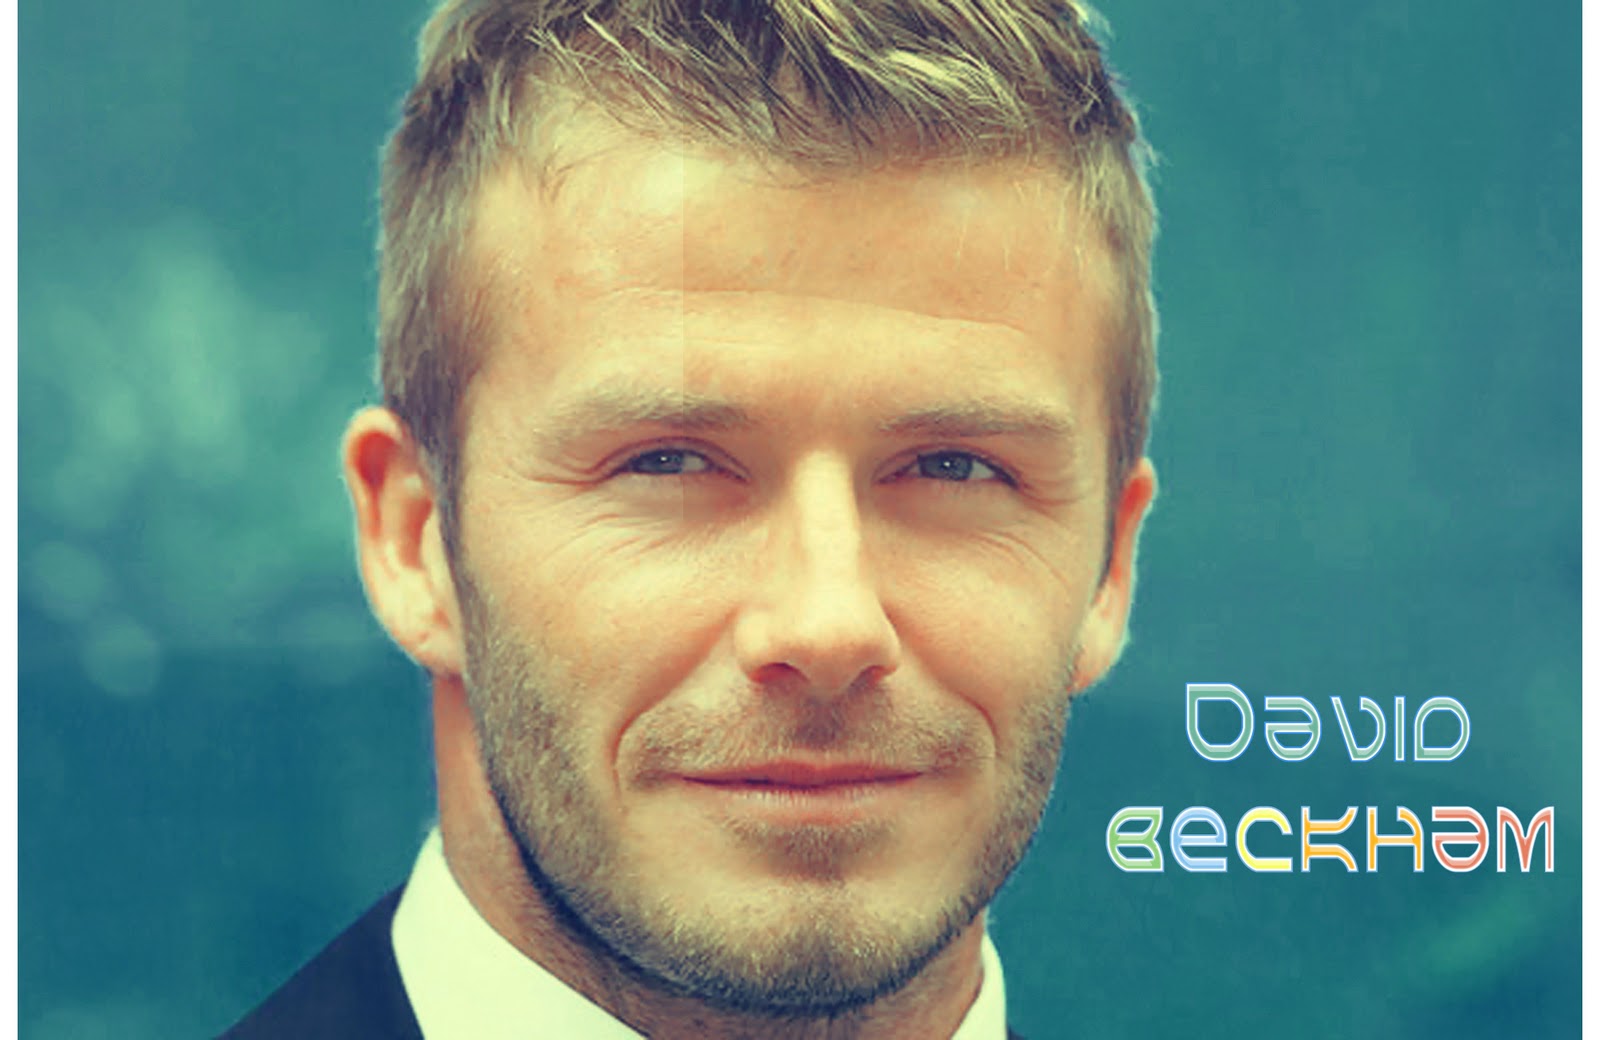 David Beckham Hd Picture - Receding Hairline Hairstyle Reddit , HD Wallpaper & Backgrounds